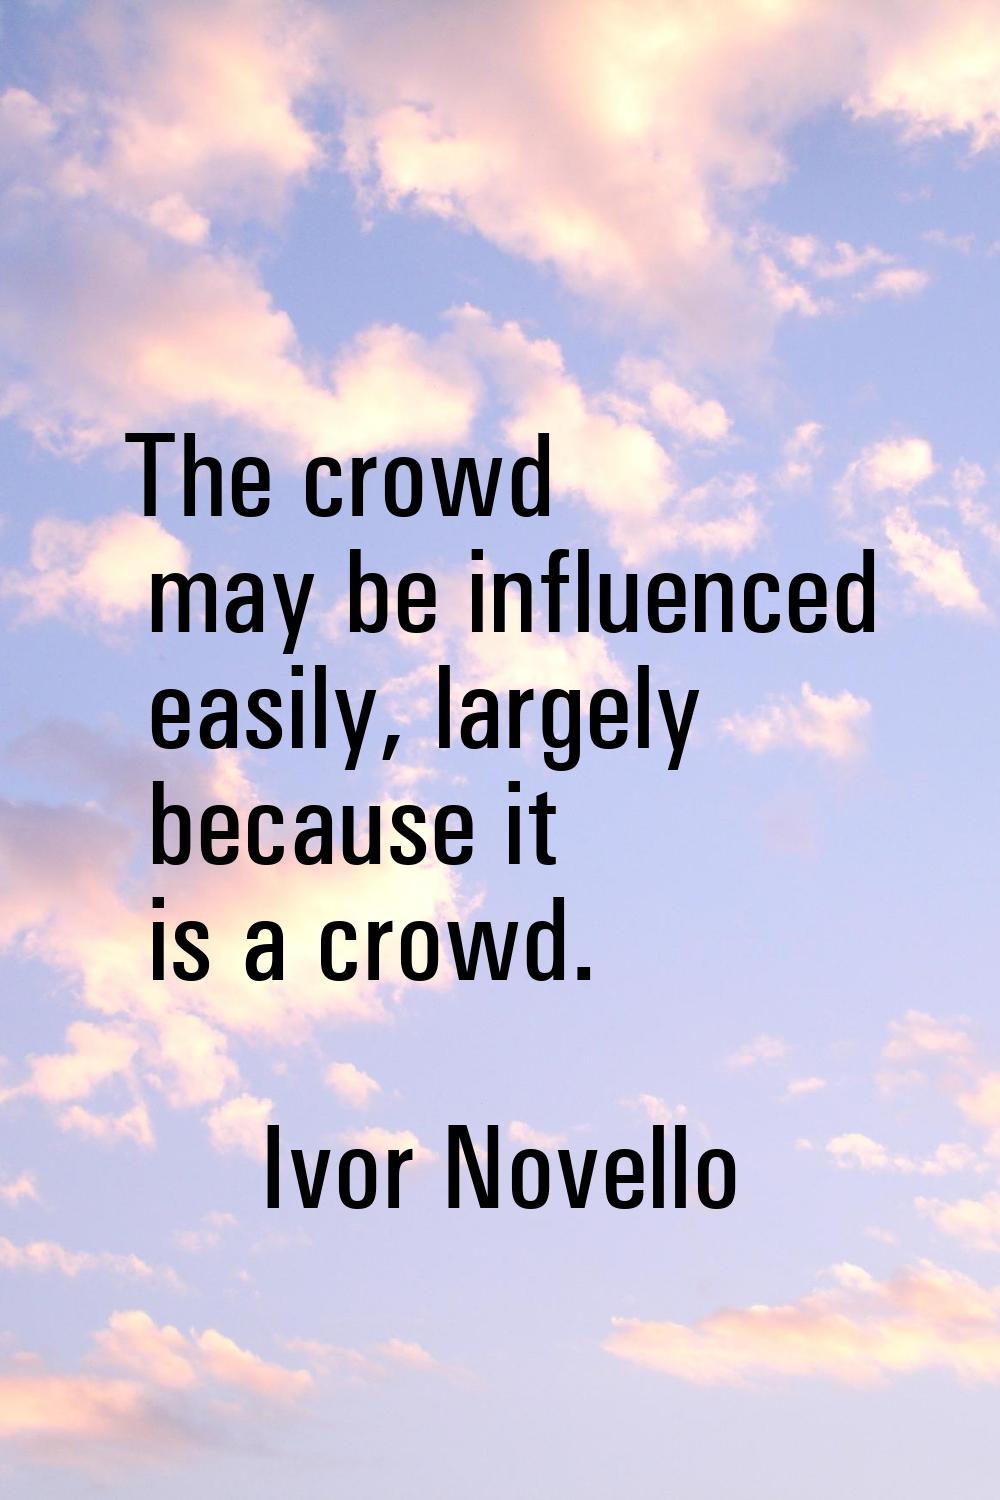 The crowd may be influenced easily, largely because it is a crowd.